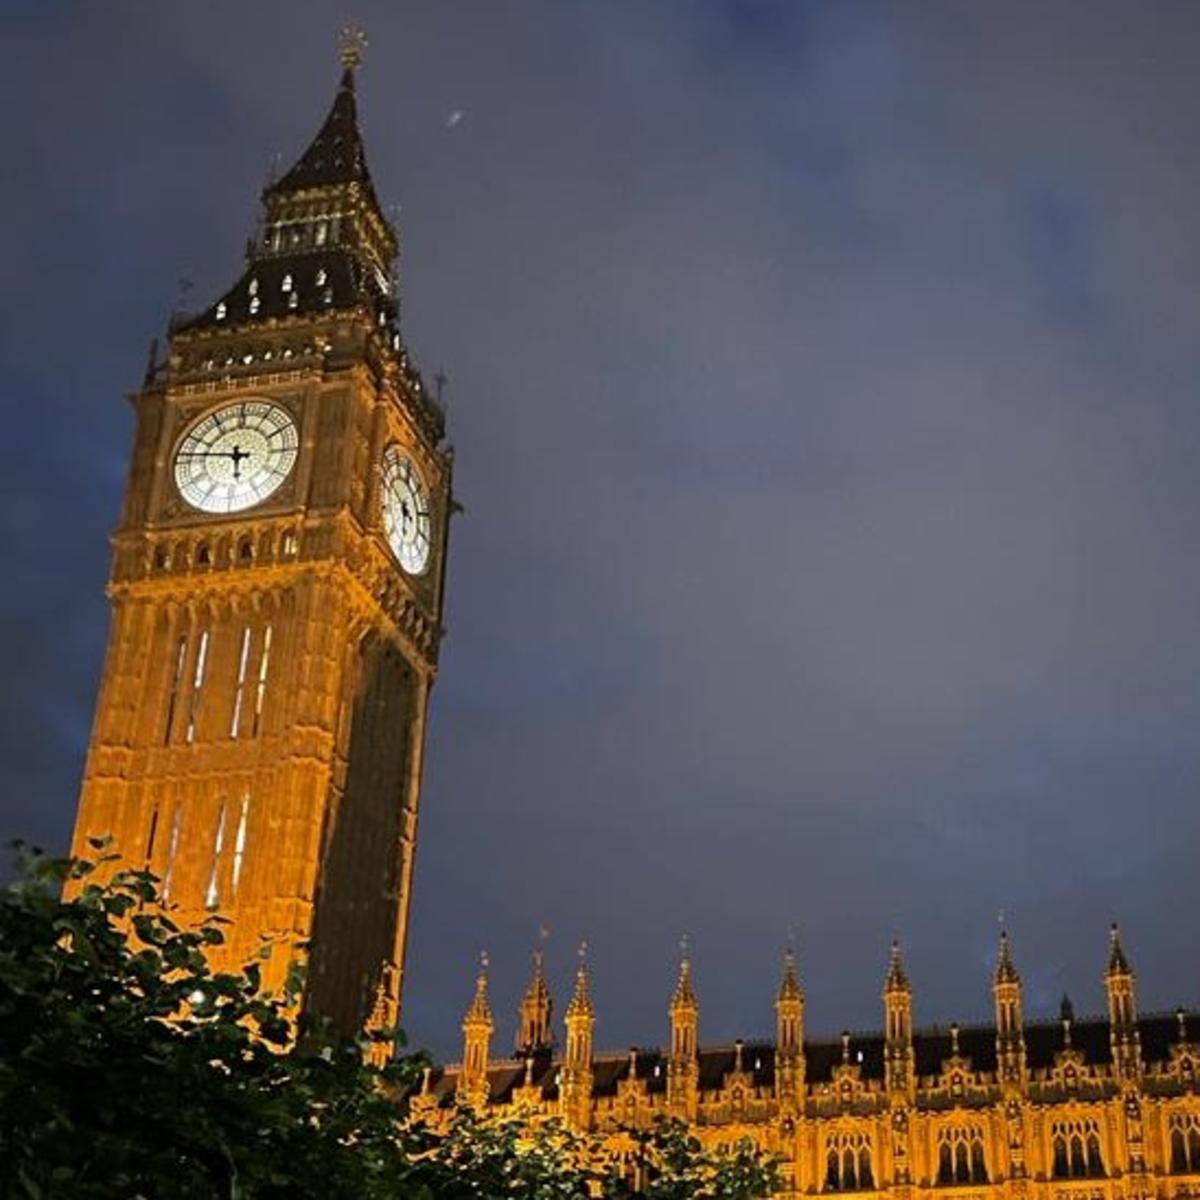 Scenic view of Big Ben at nighttime